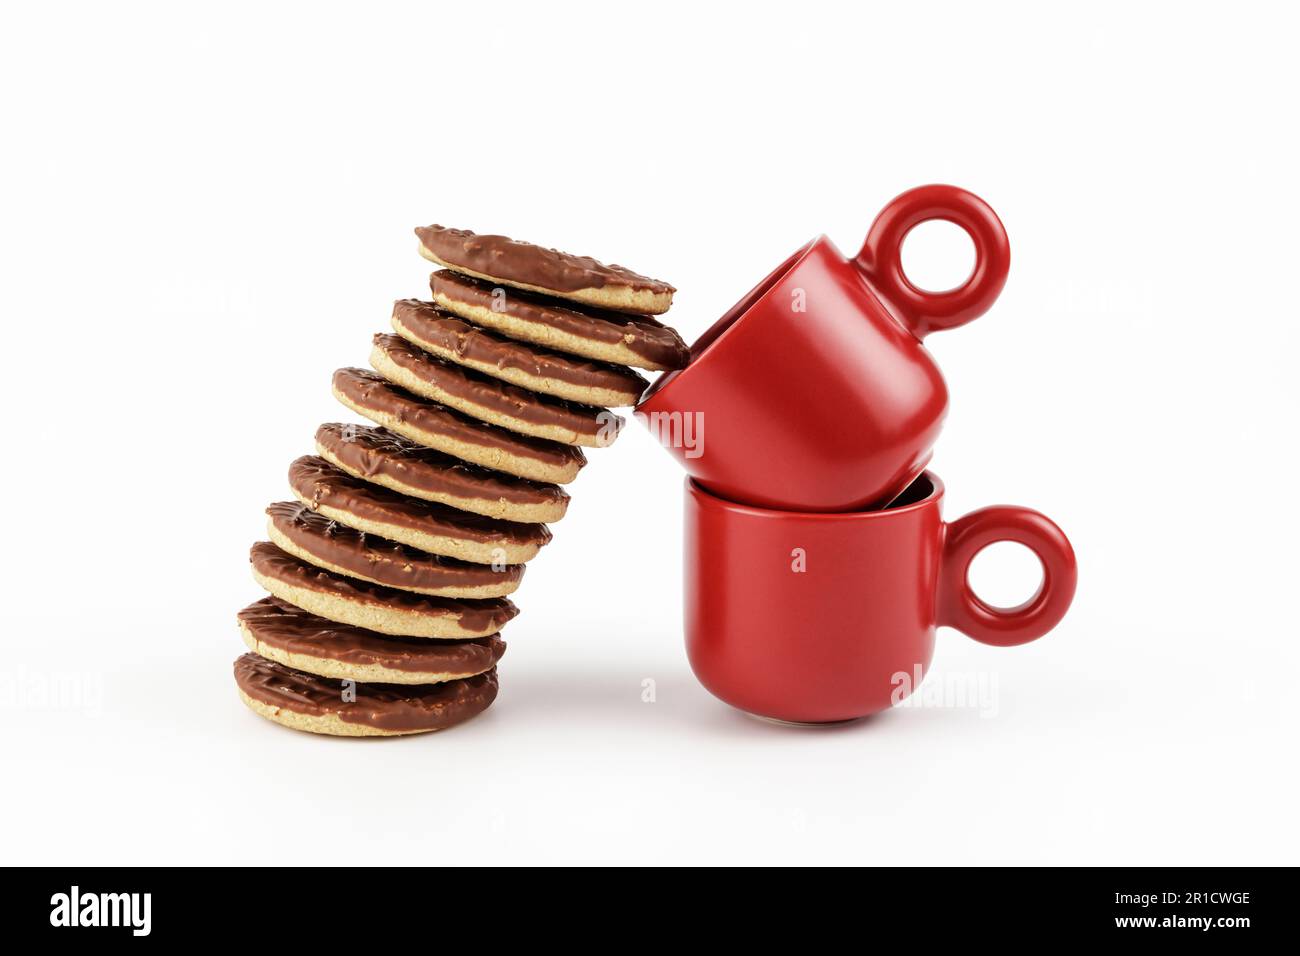 Stacked chocolate biscuits leaning in to two red espresso cups Stock Photo